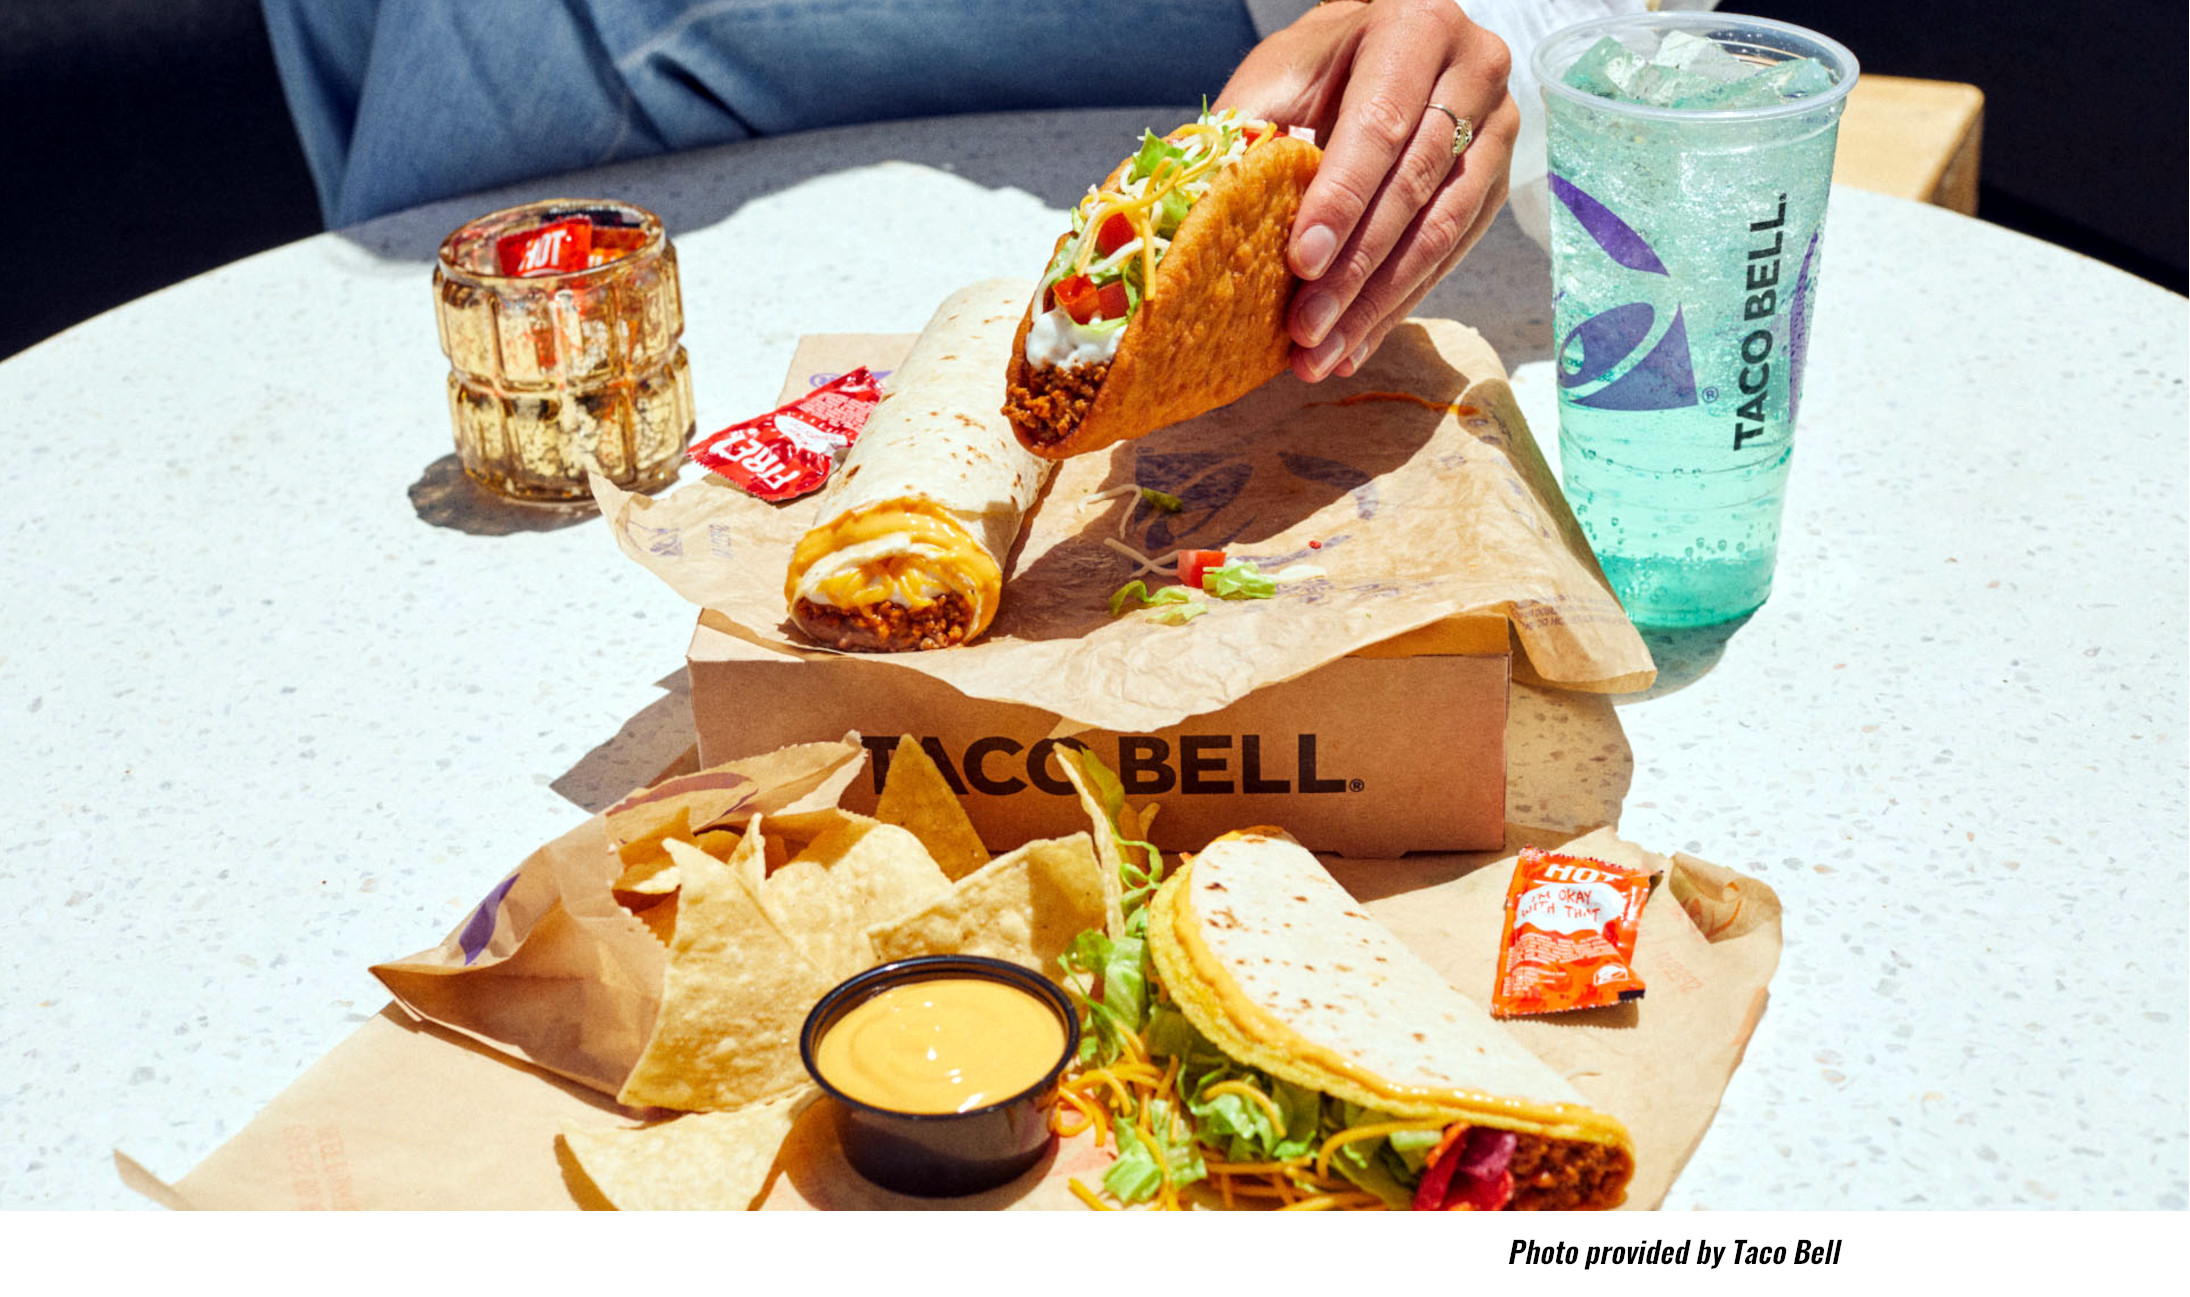 Taco Bell Food Luxury, Sonic Values, and Chilly Deliveries